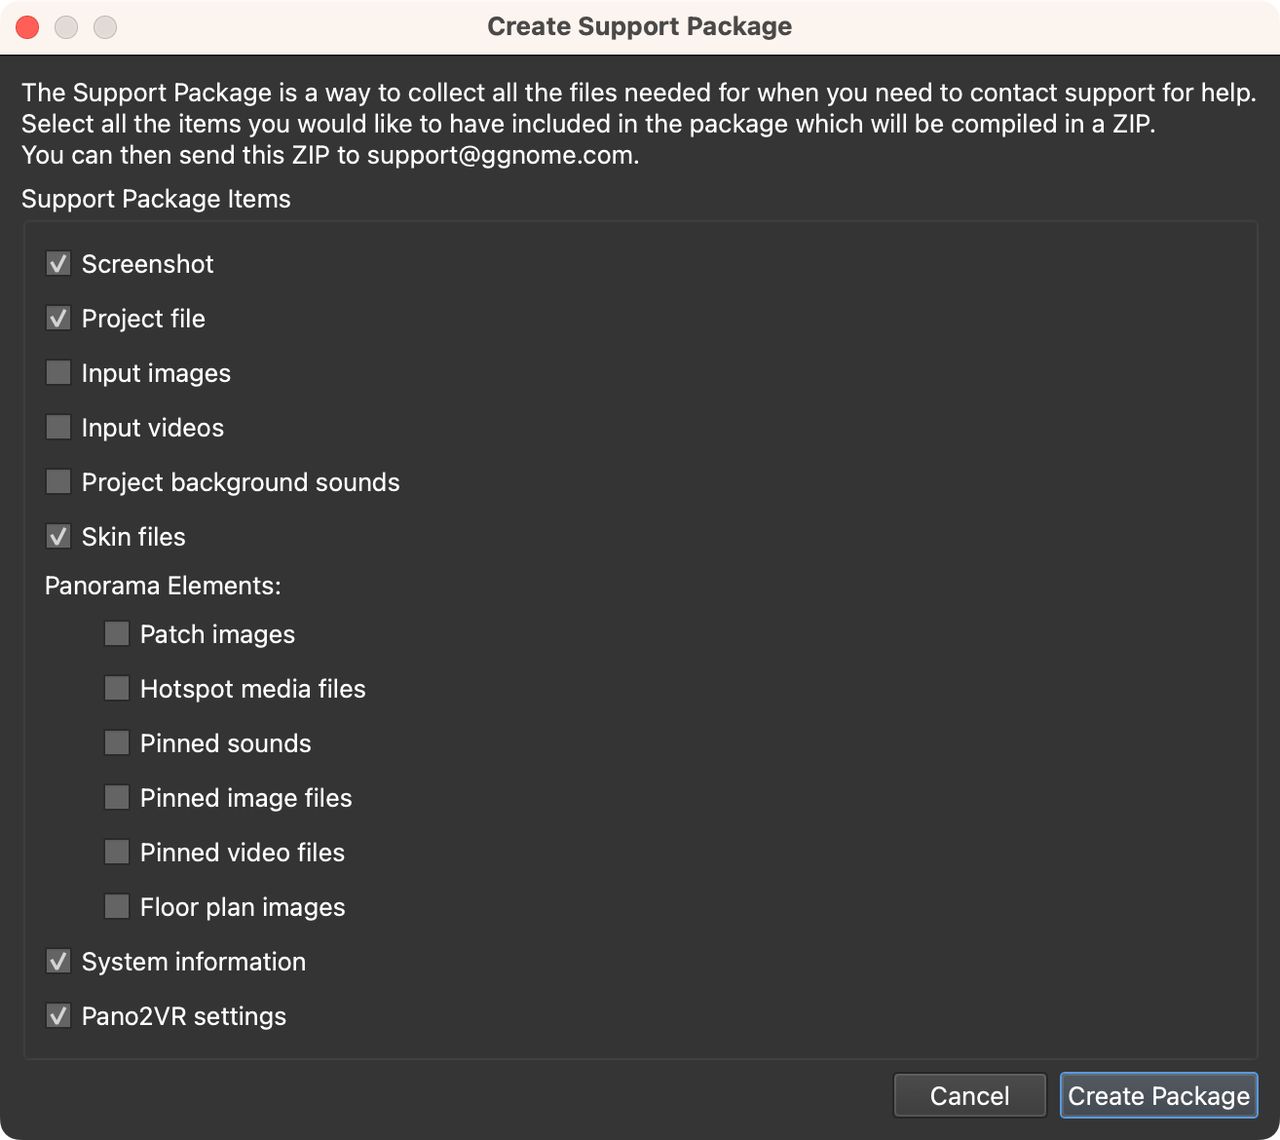 Support Package Settings